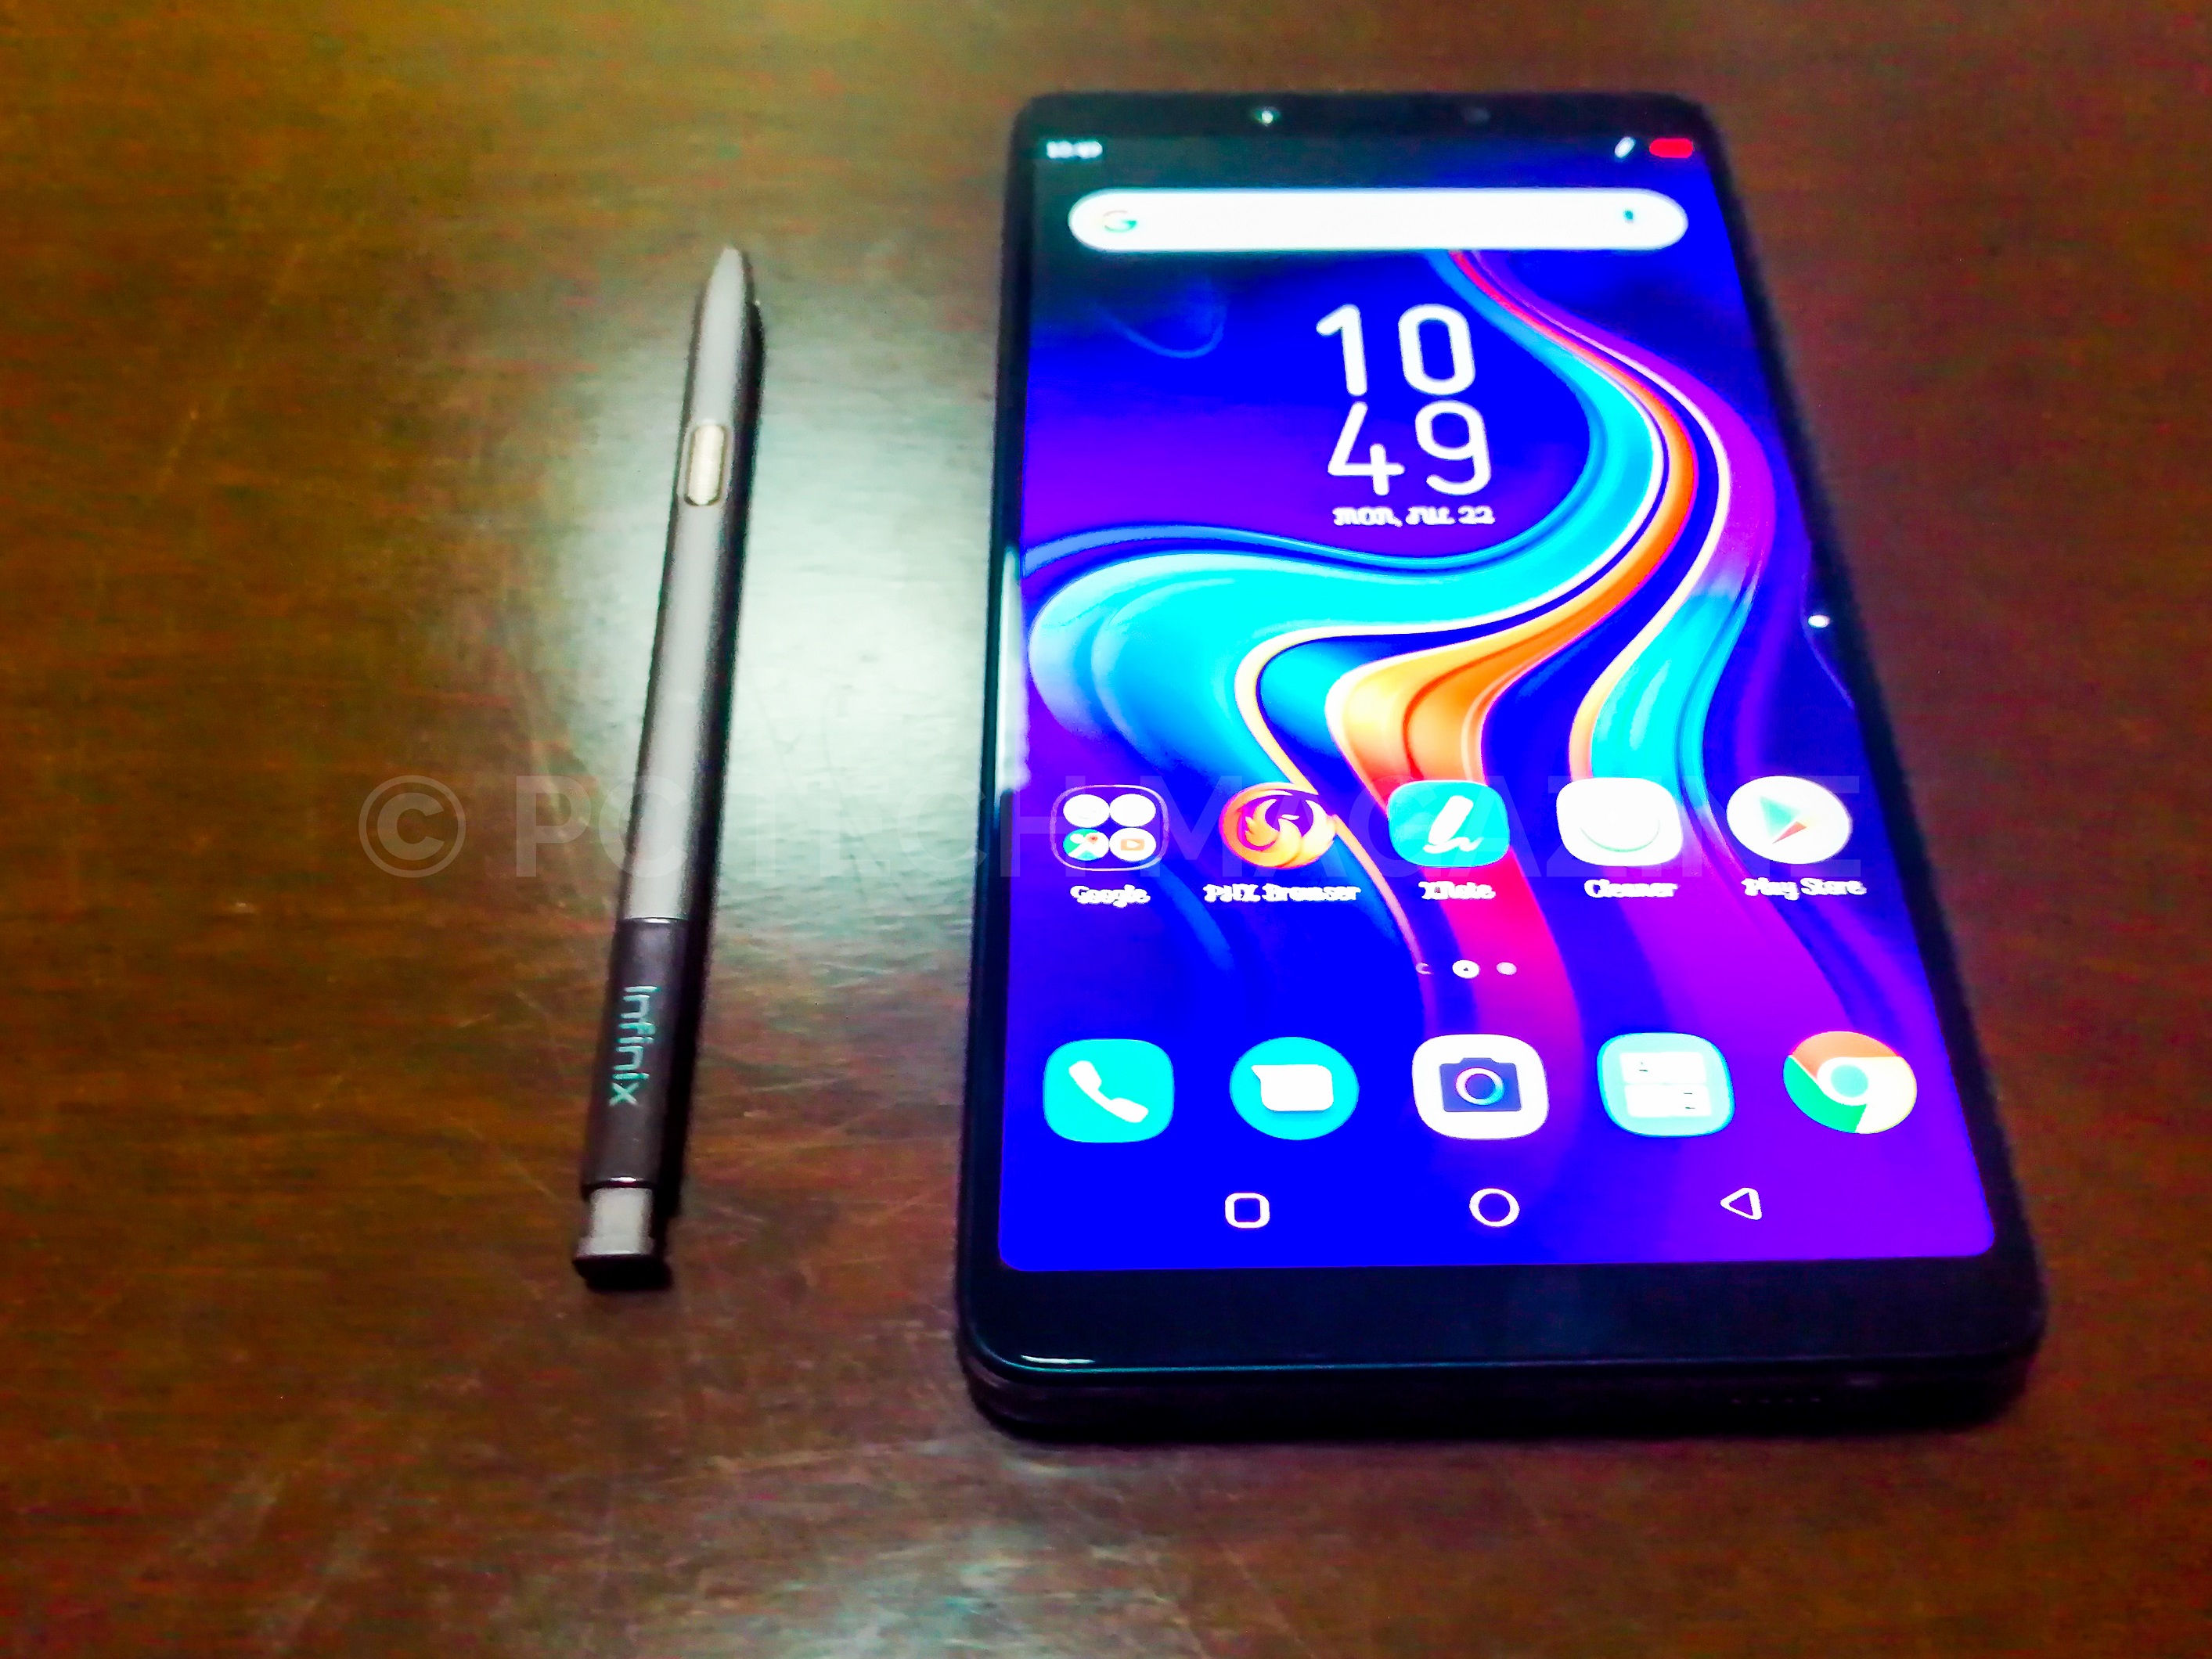 The Infinix Note 6 with its X Pen pictured besides it.